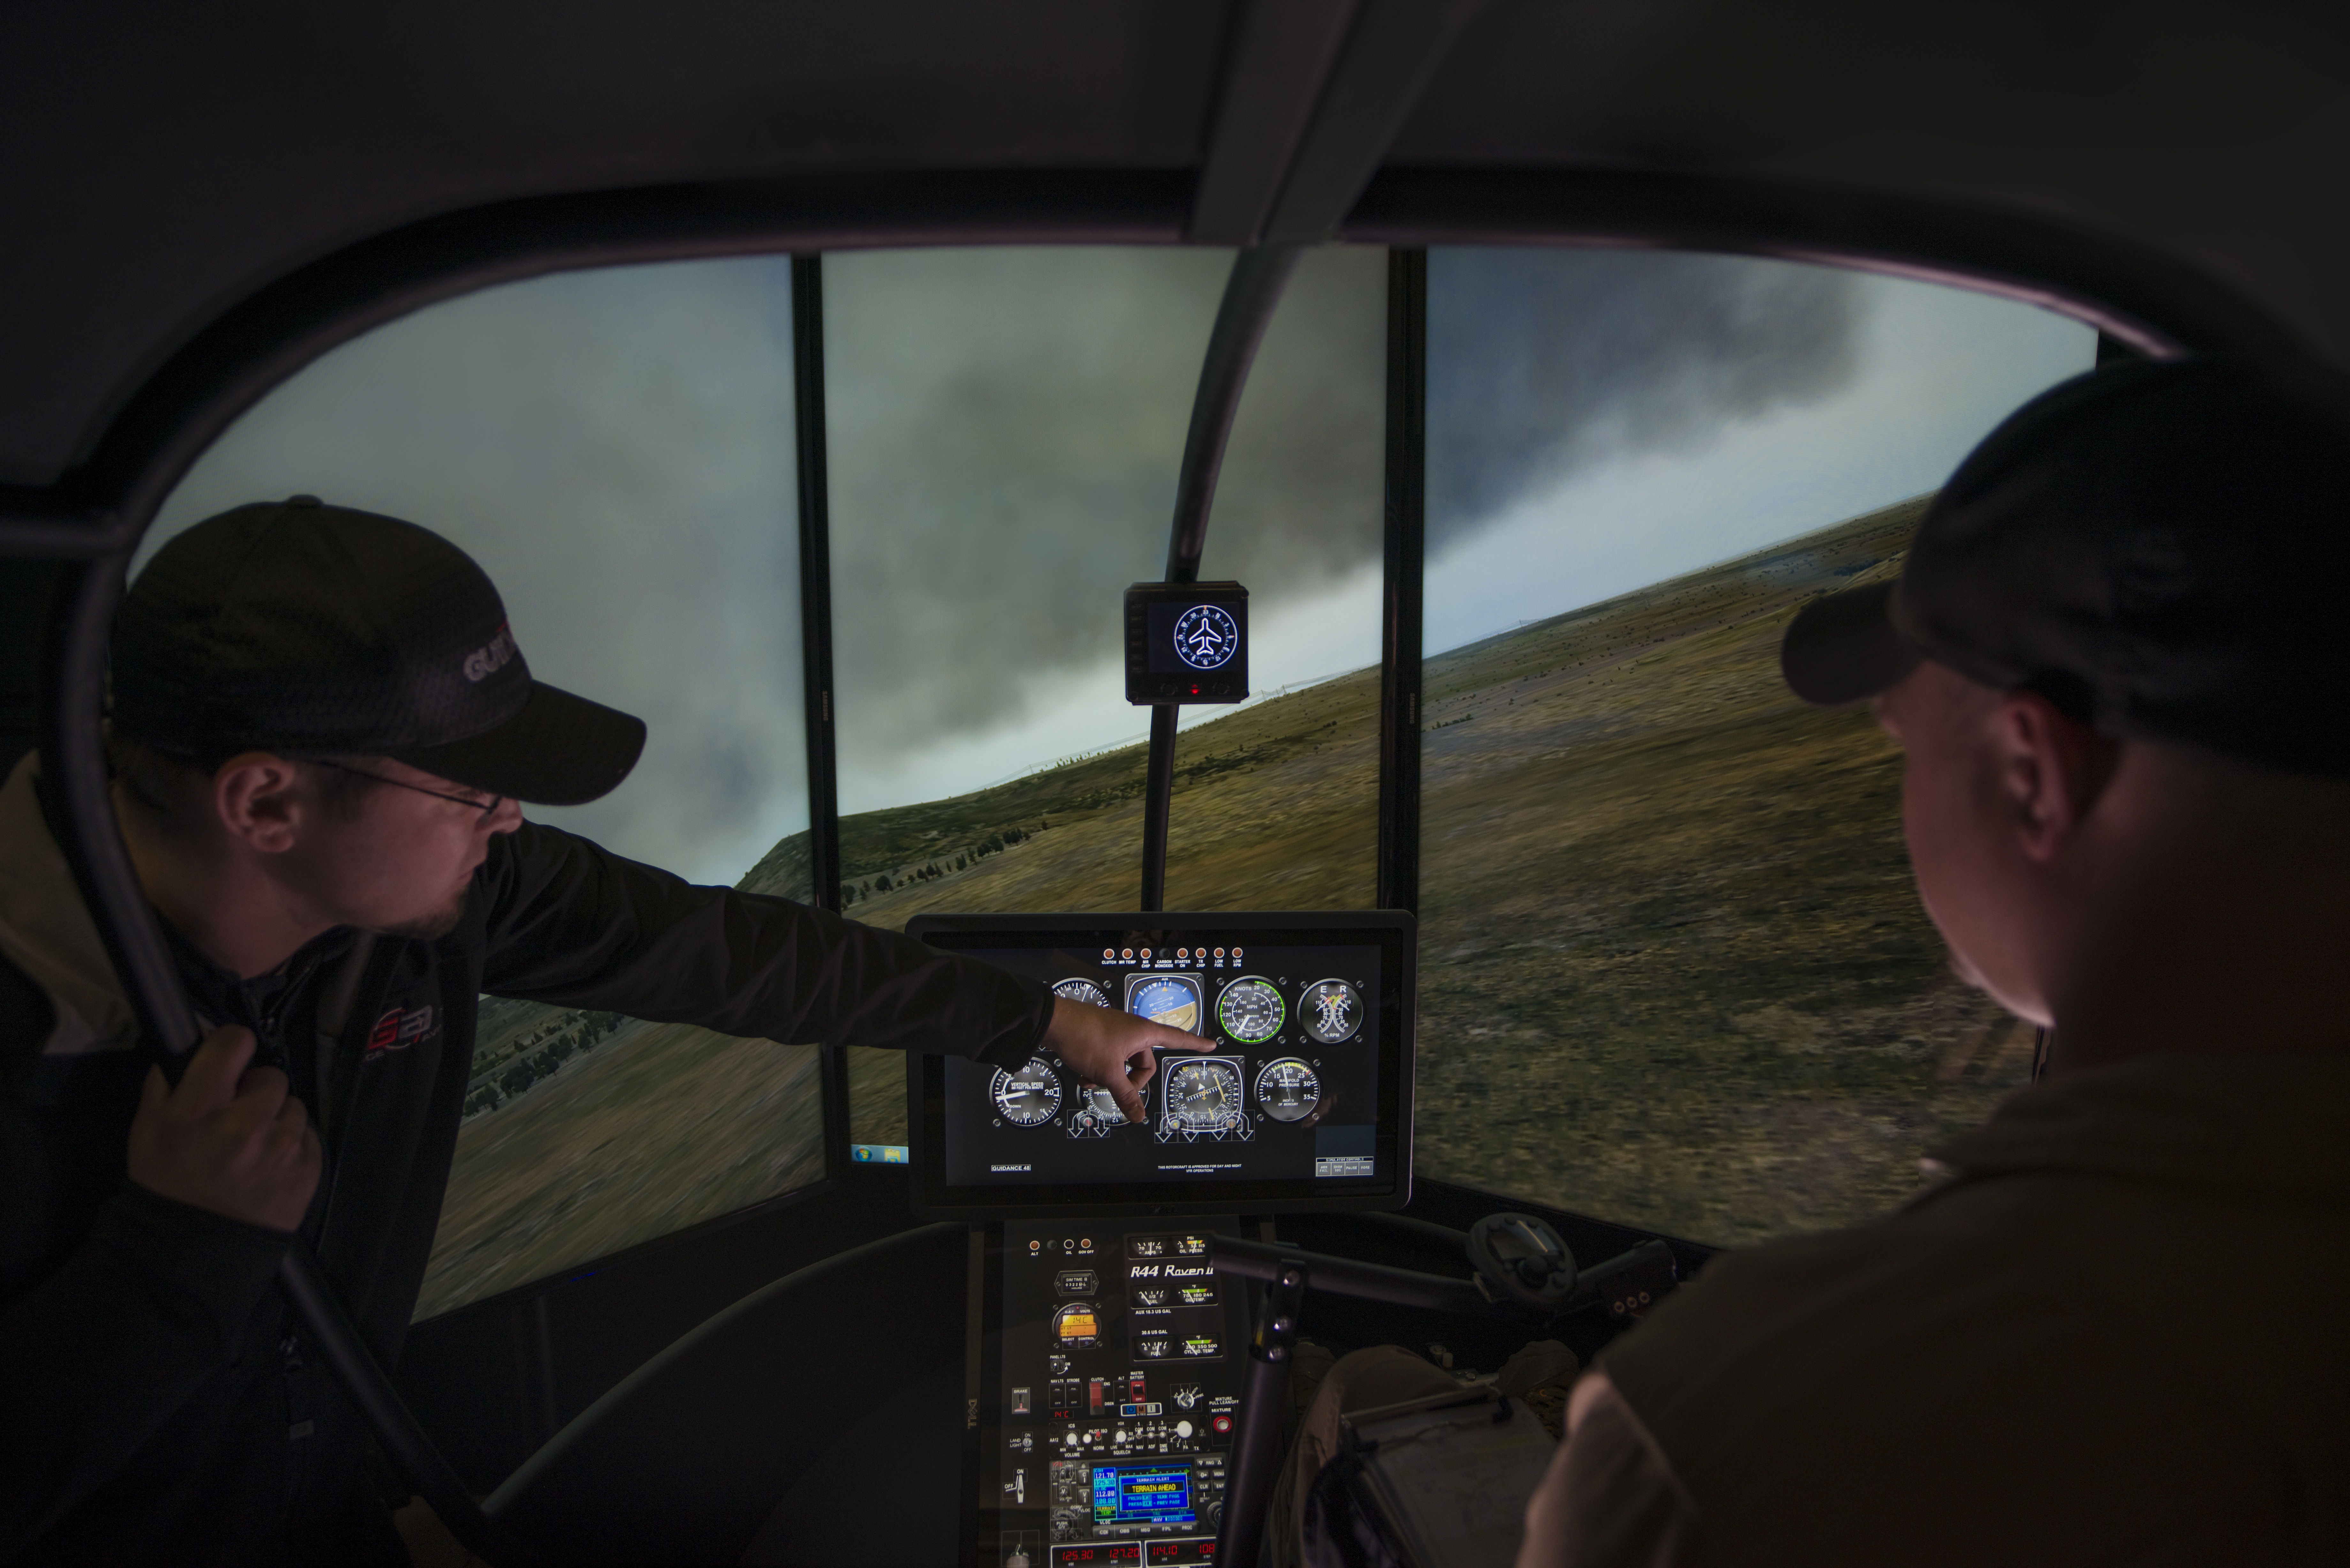 X-Copter in use helicopter flight simulation